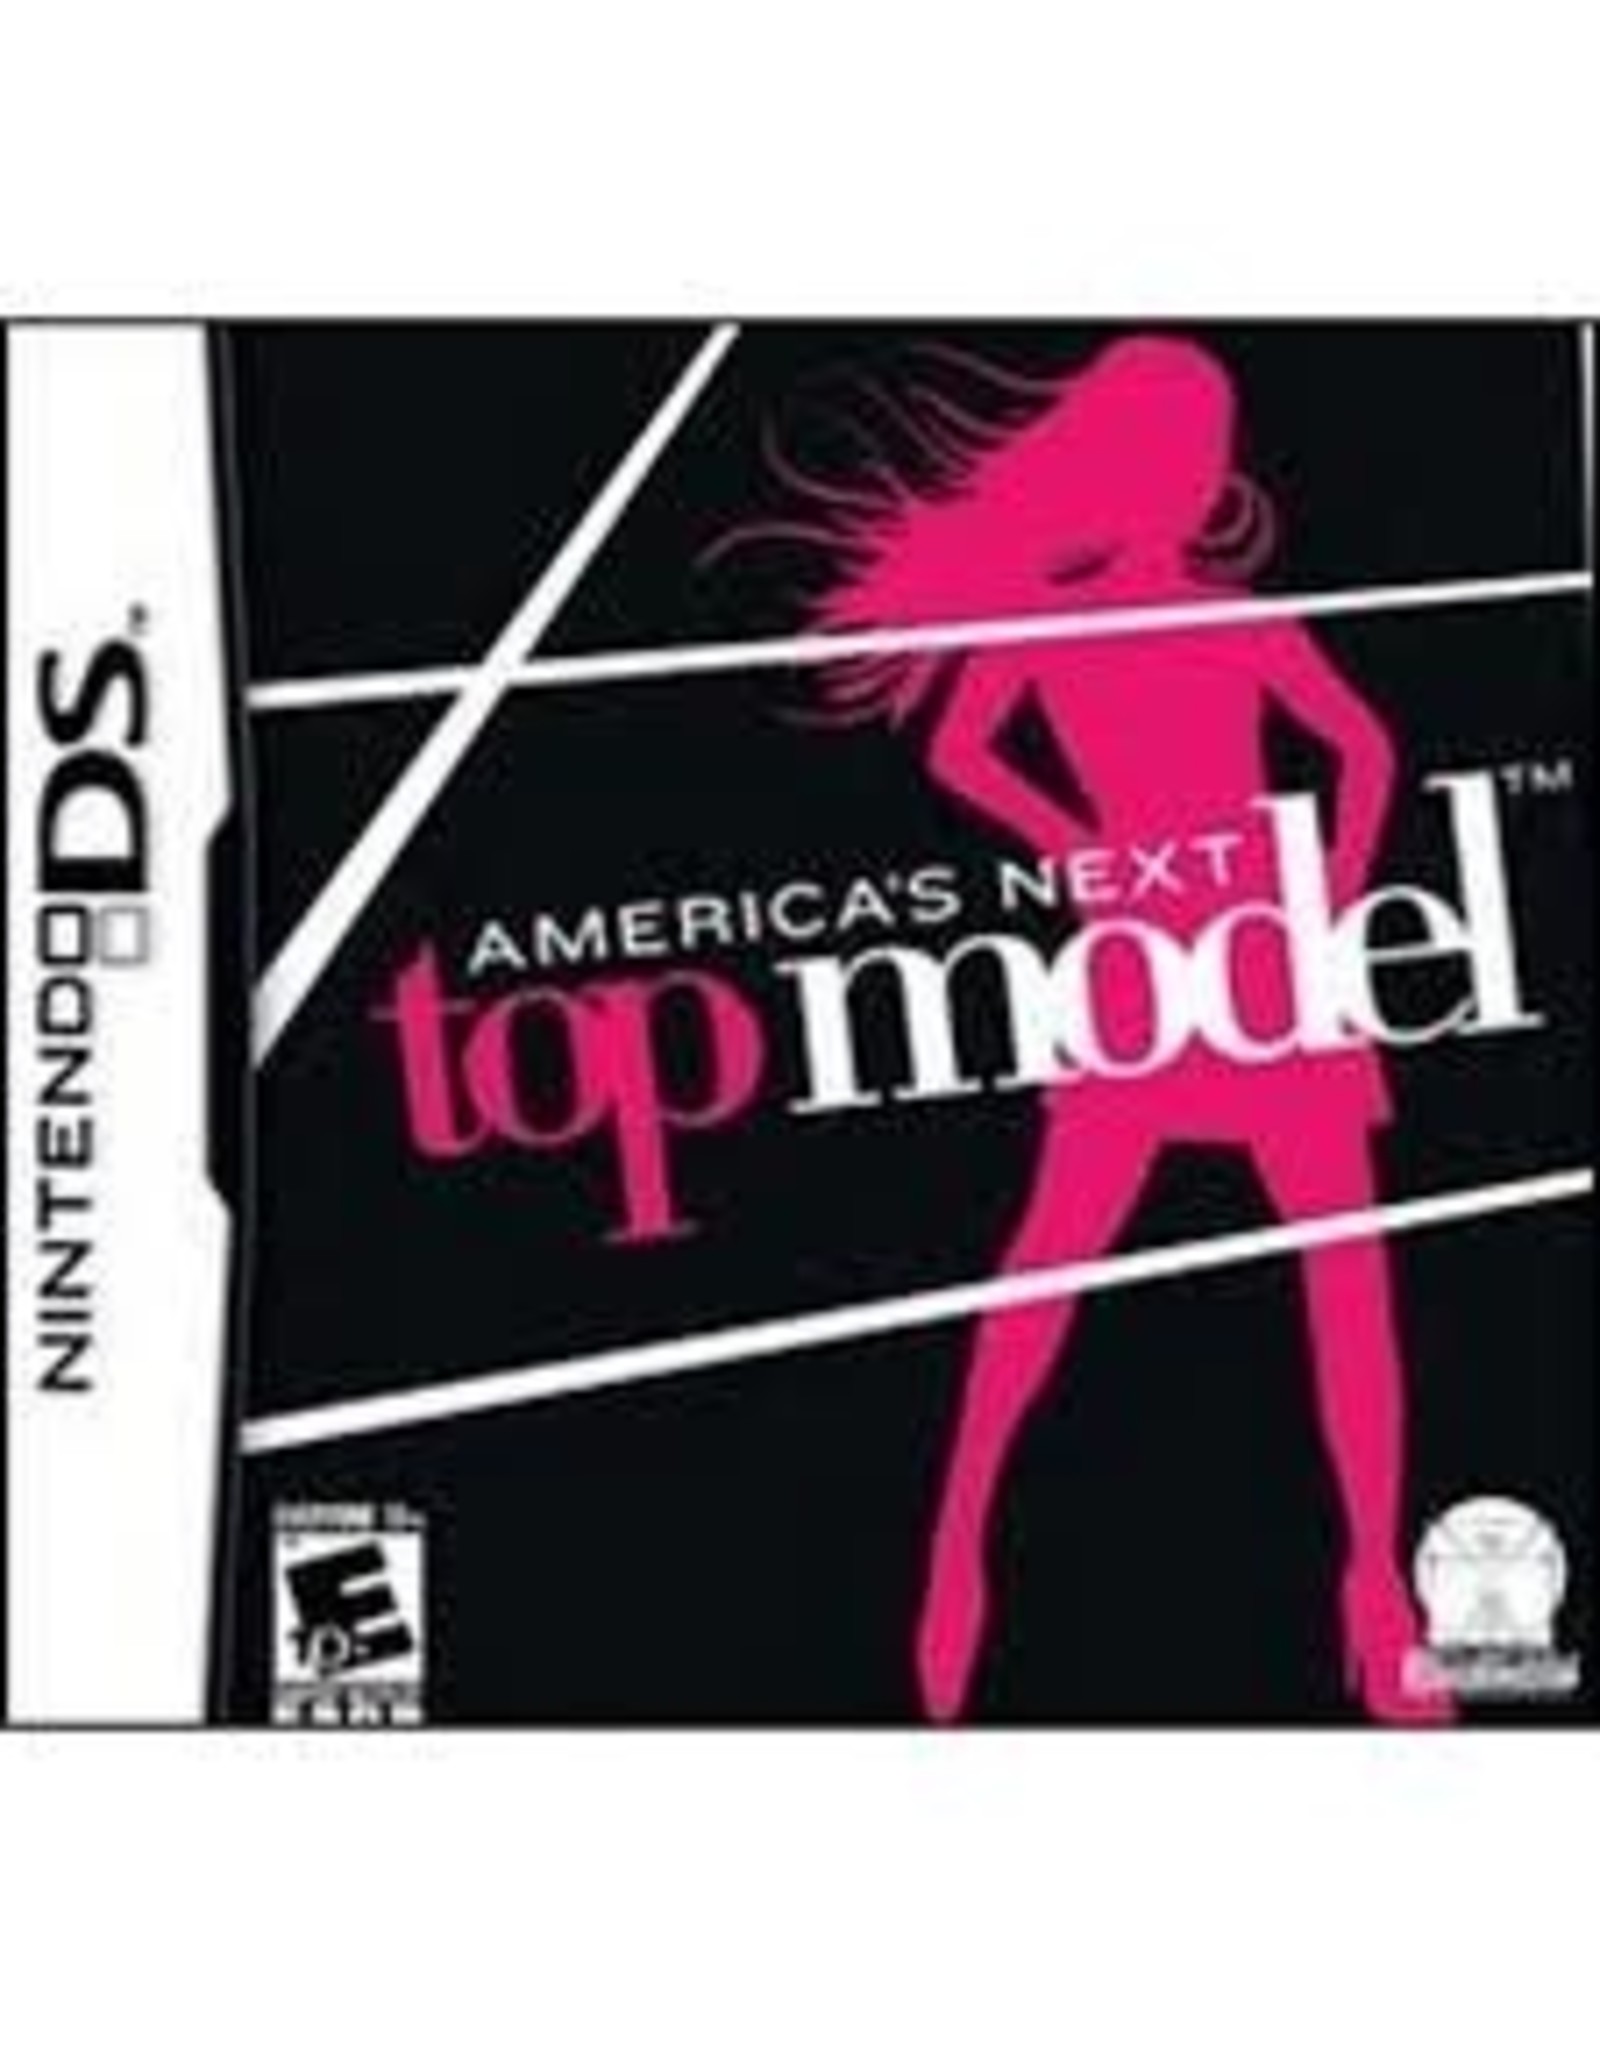 Nintendo DS America's Next Top Model (Cart Only)